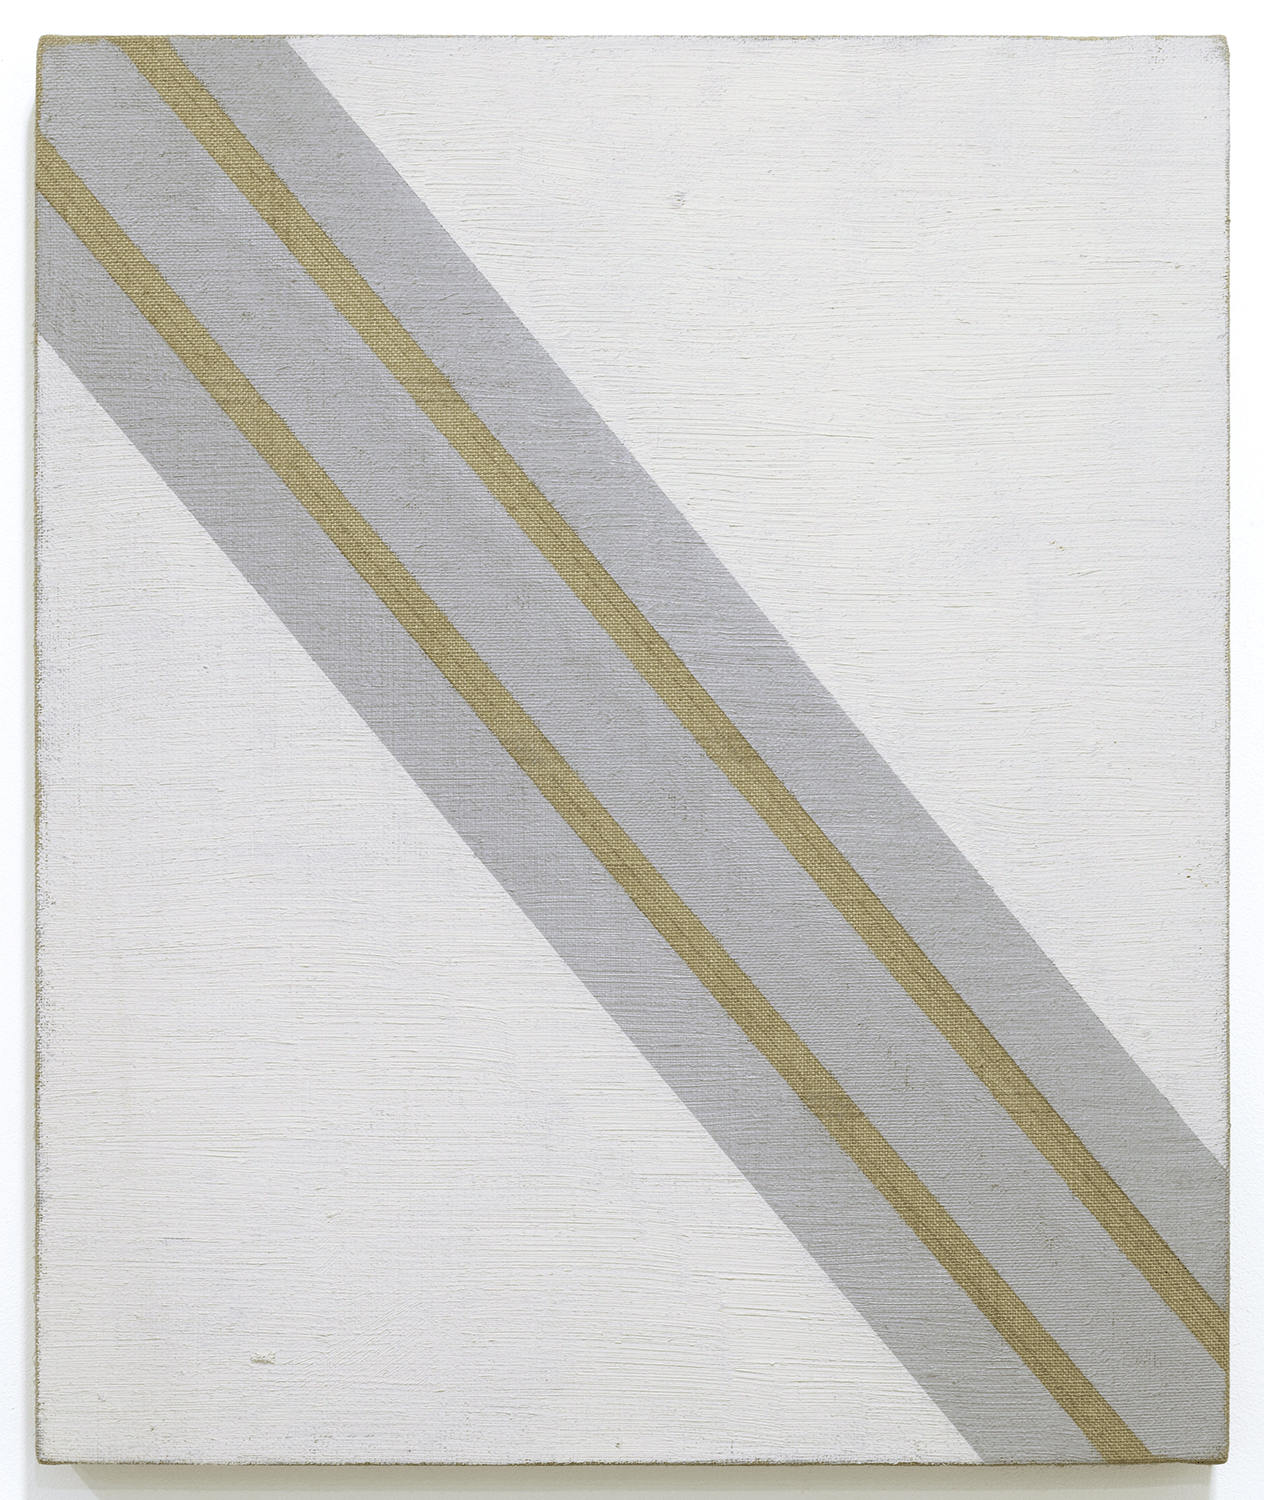 Untitled　/ Oil, pencil on Canvas,45.5 x 38 cm,1969